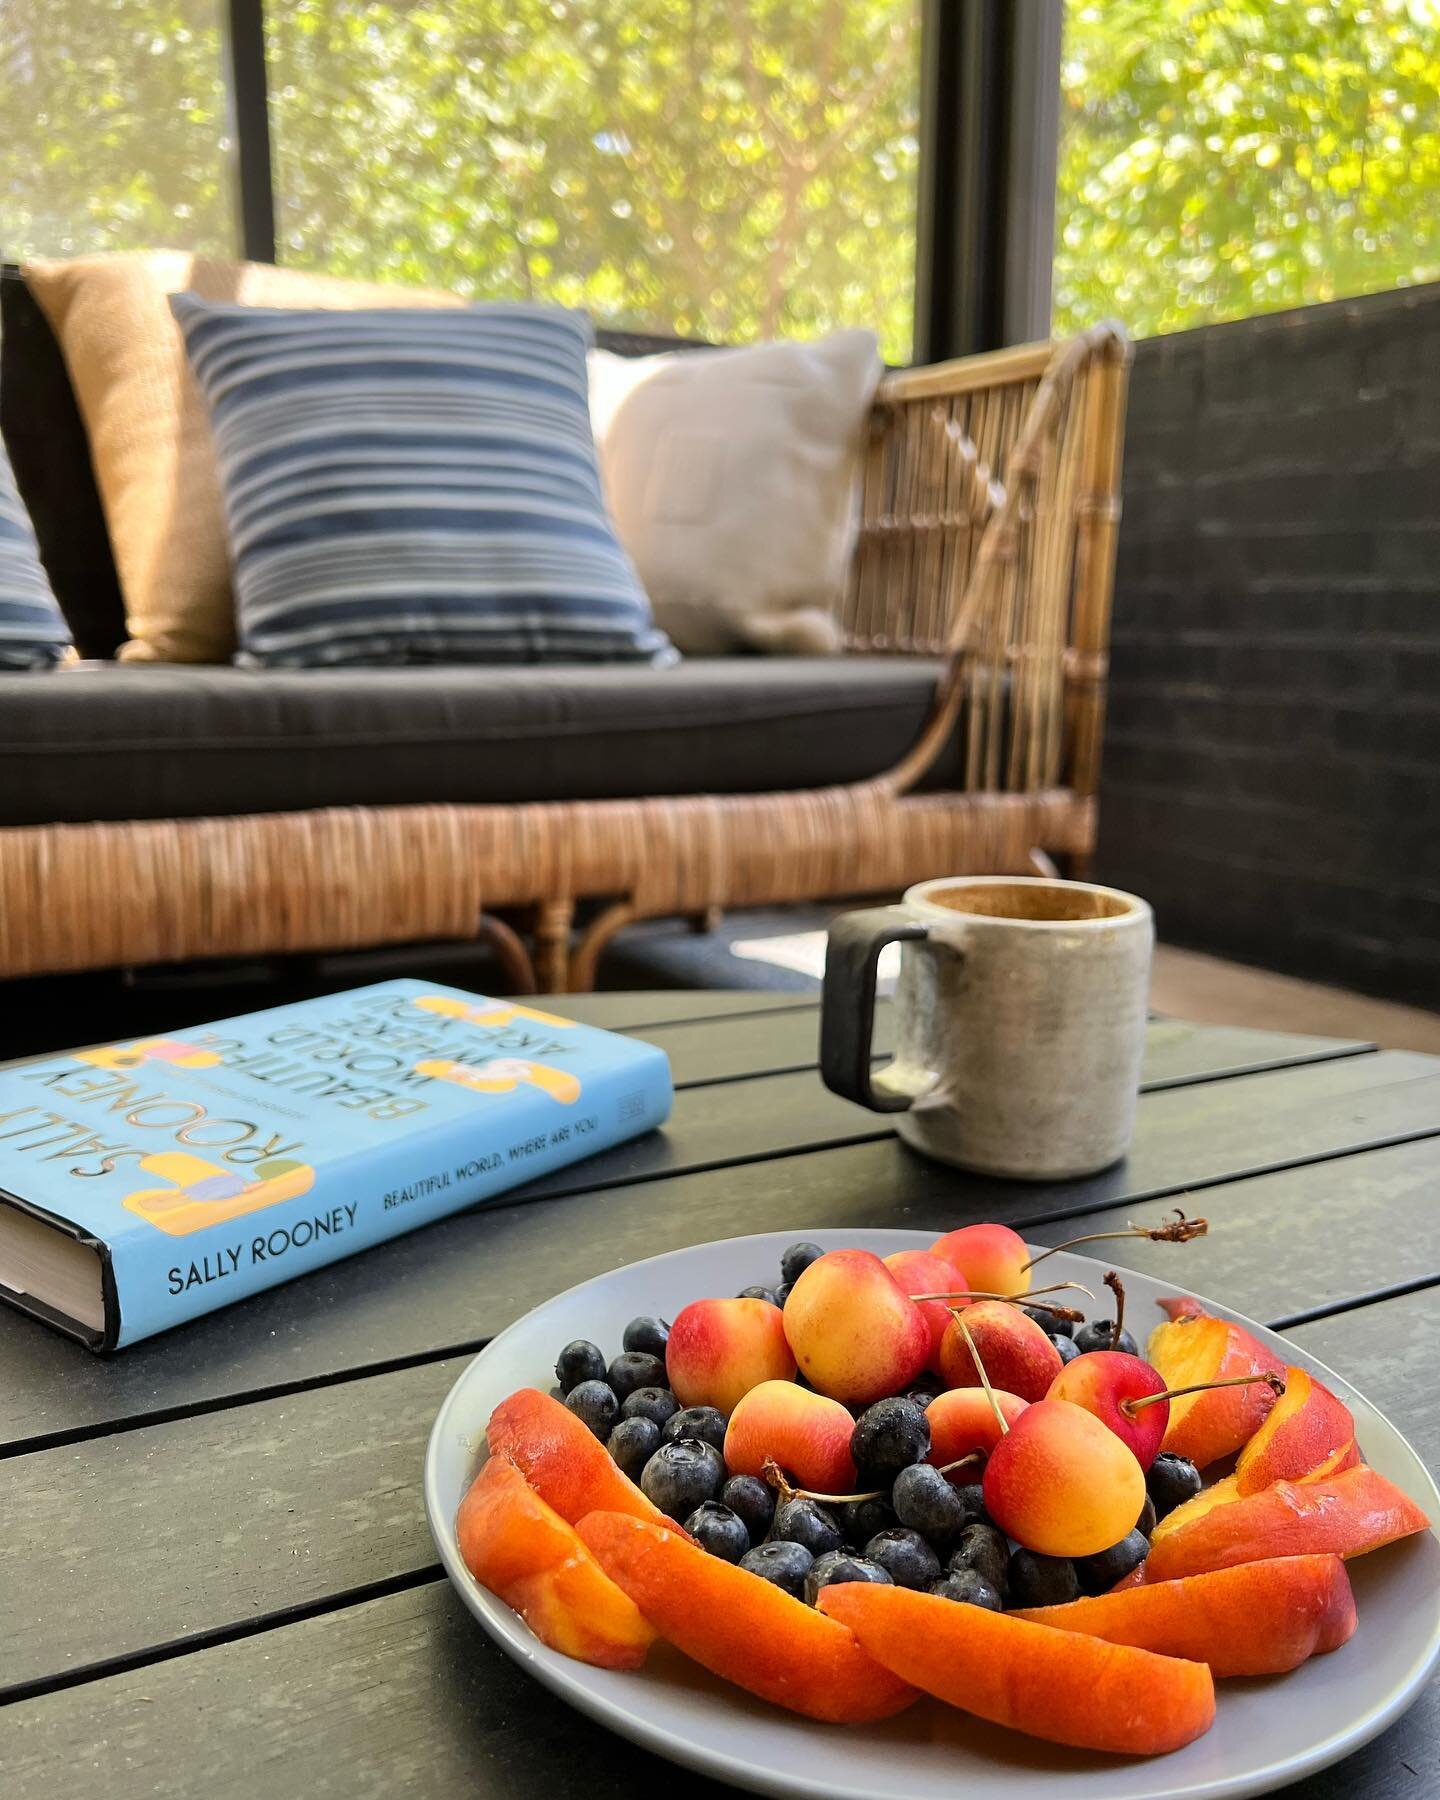 Impeccable morning vibes on the screened-in porch 🤌
.
.
.
#CantonTX #TexasTravel #TheWildeHouse #TravelTexas #EastTexas #slowmornings #slowliving